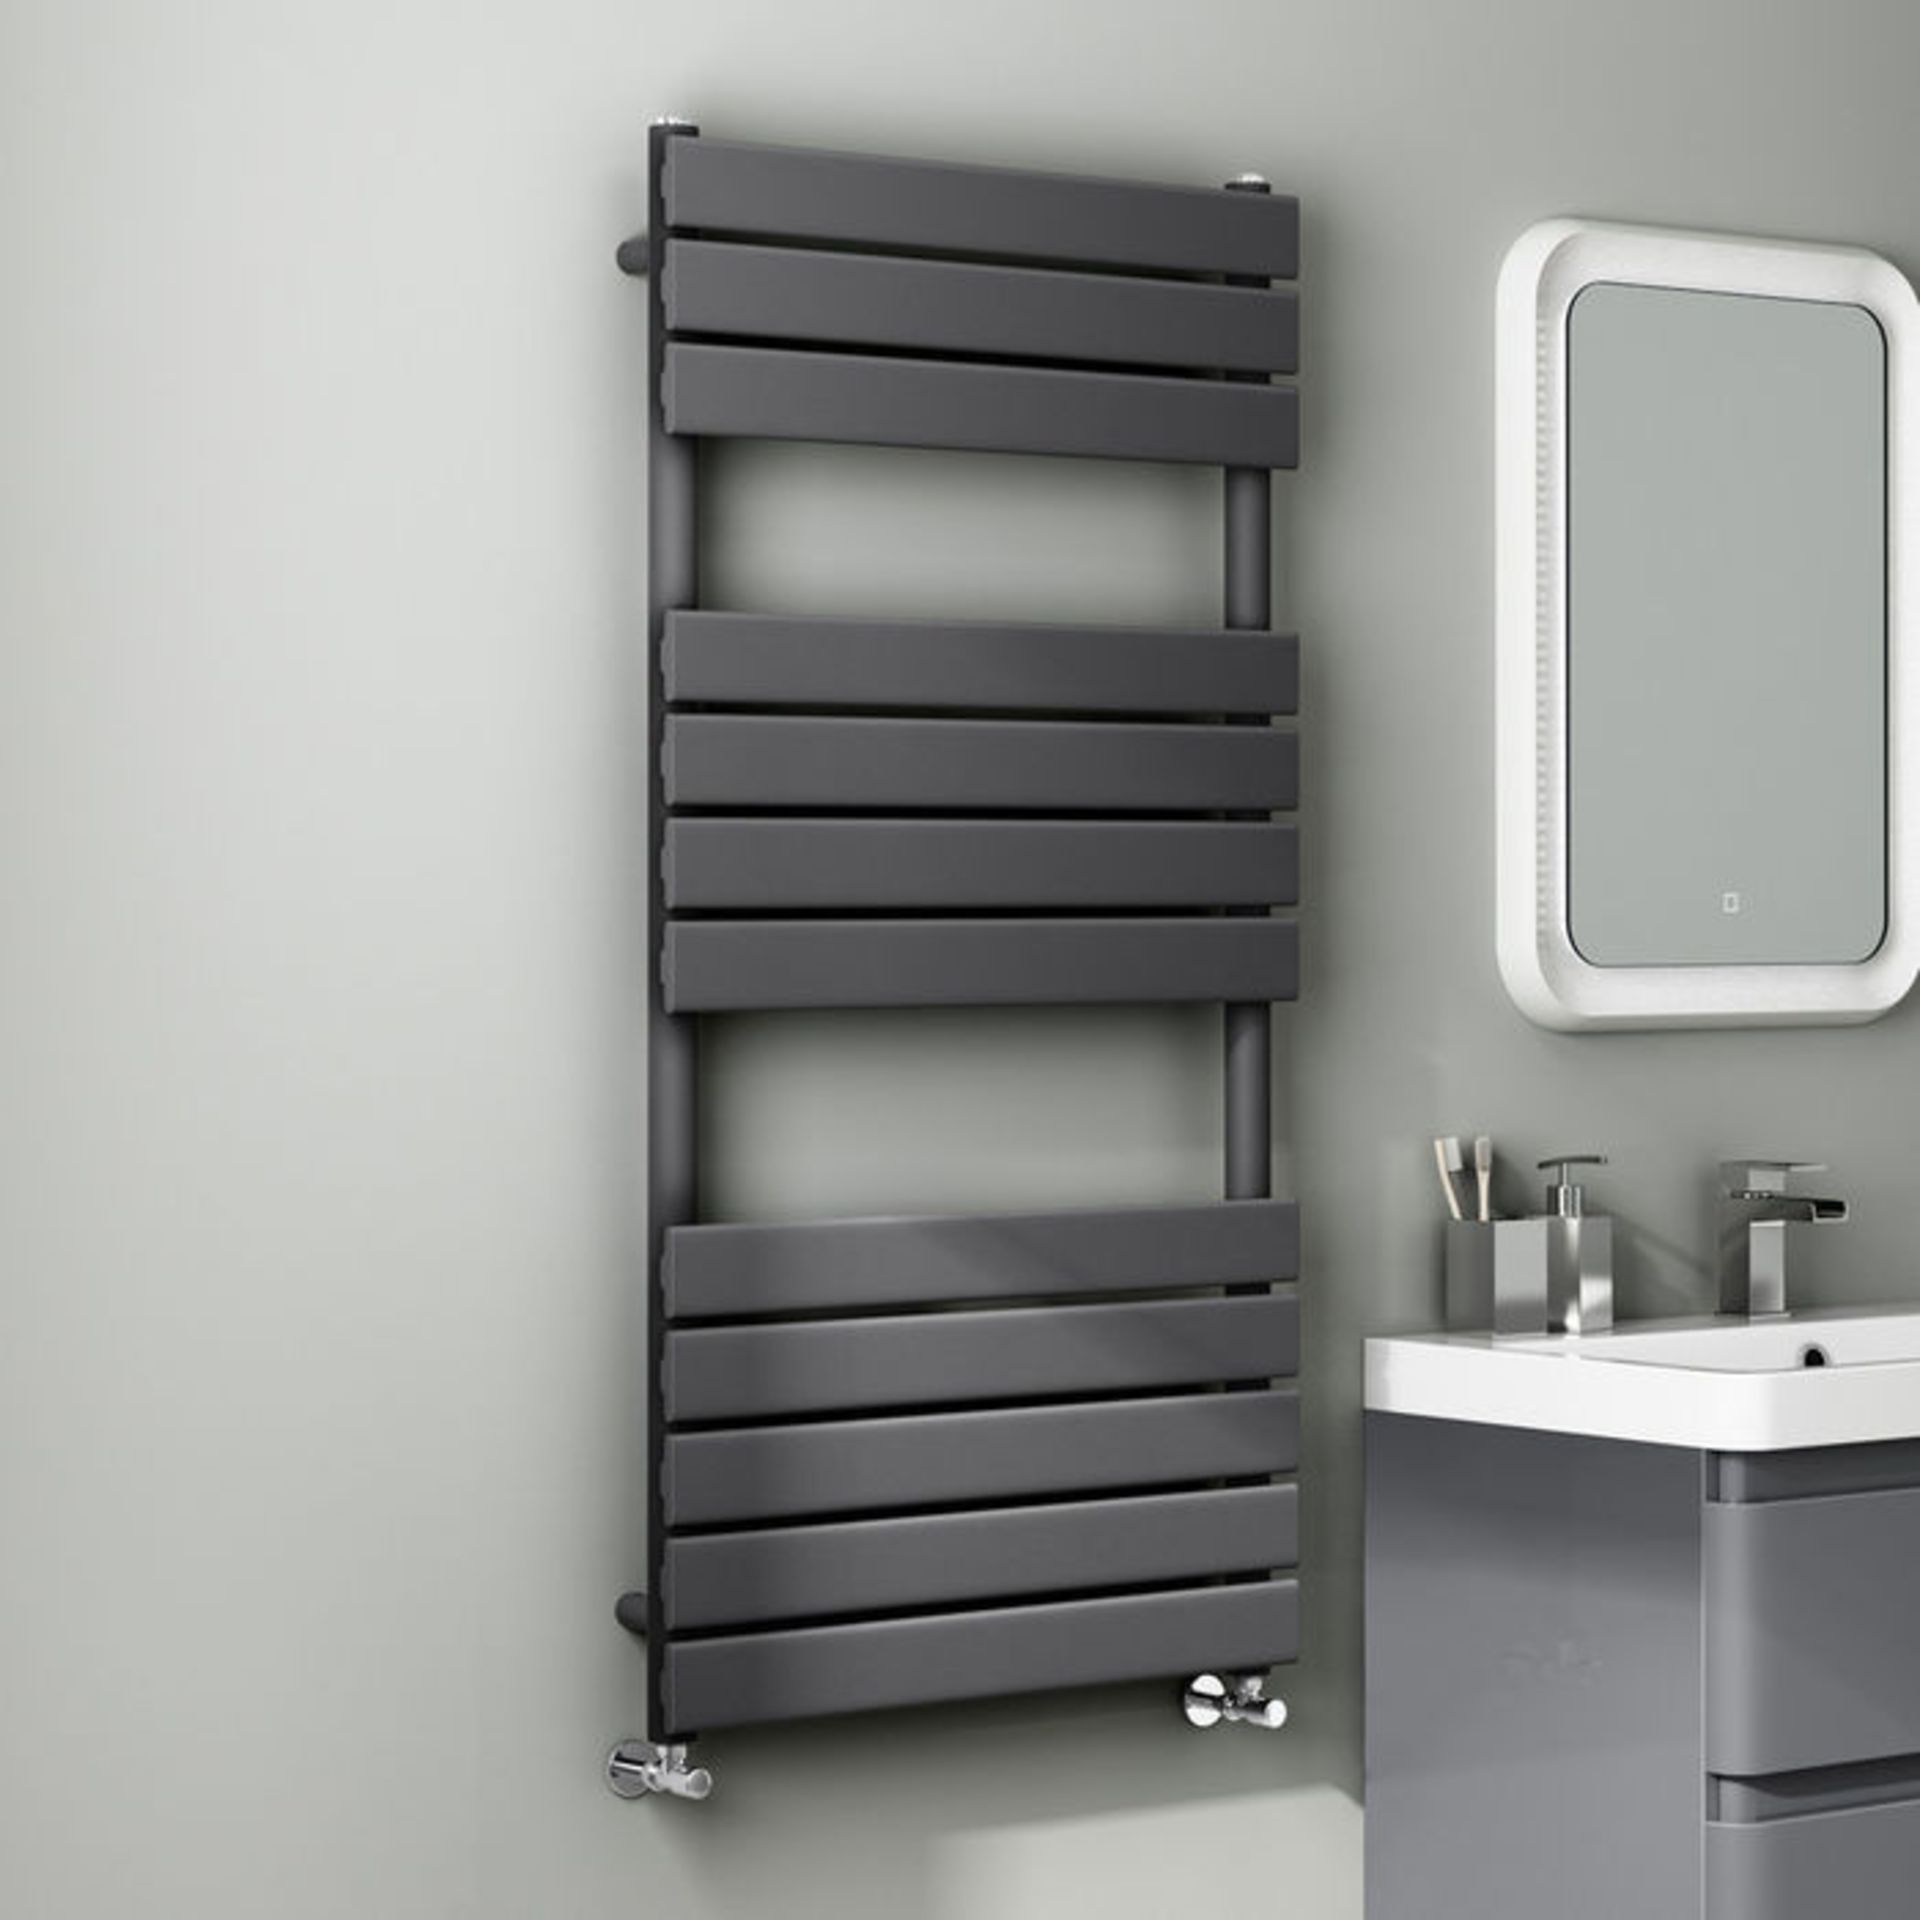 (W9) 1200x600mm Anthracite Flat Panel Ladder Towel Radiator. RRP £374.99. Made with low carbon